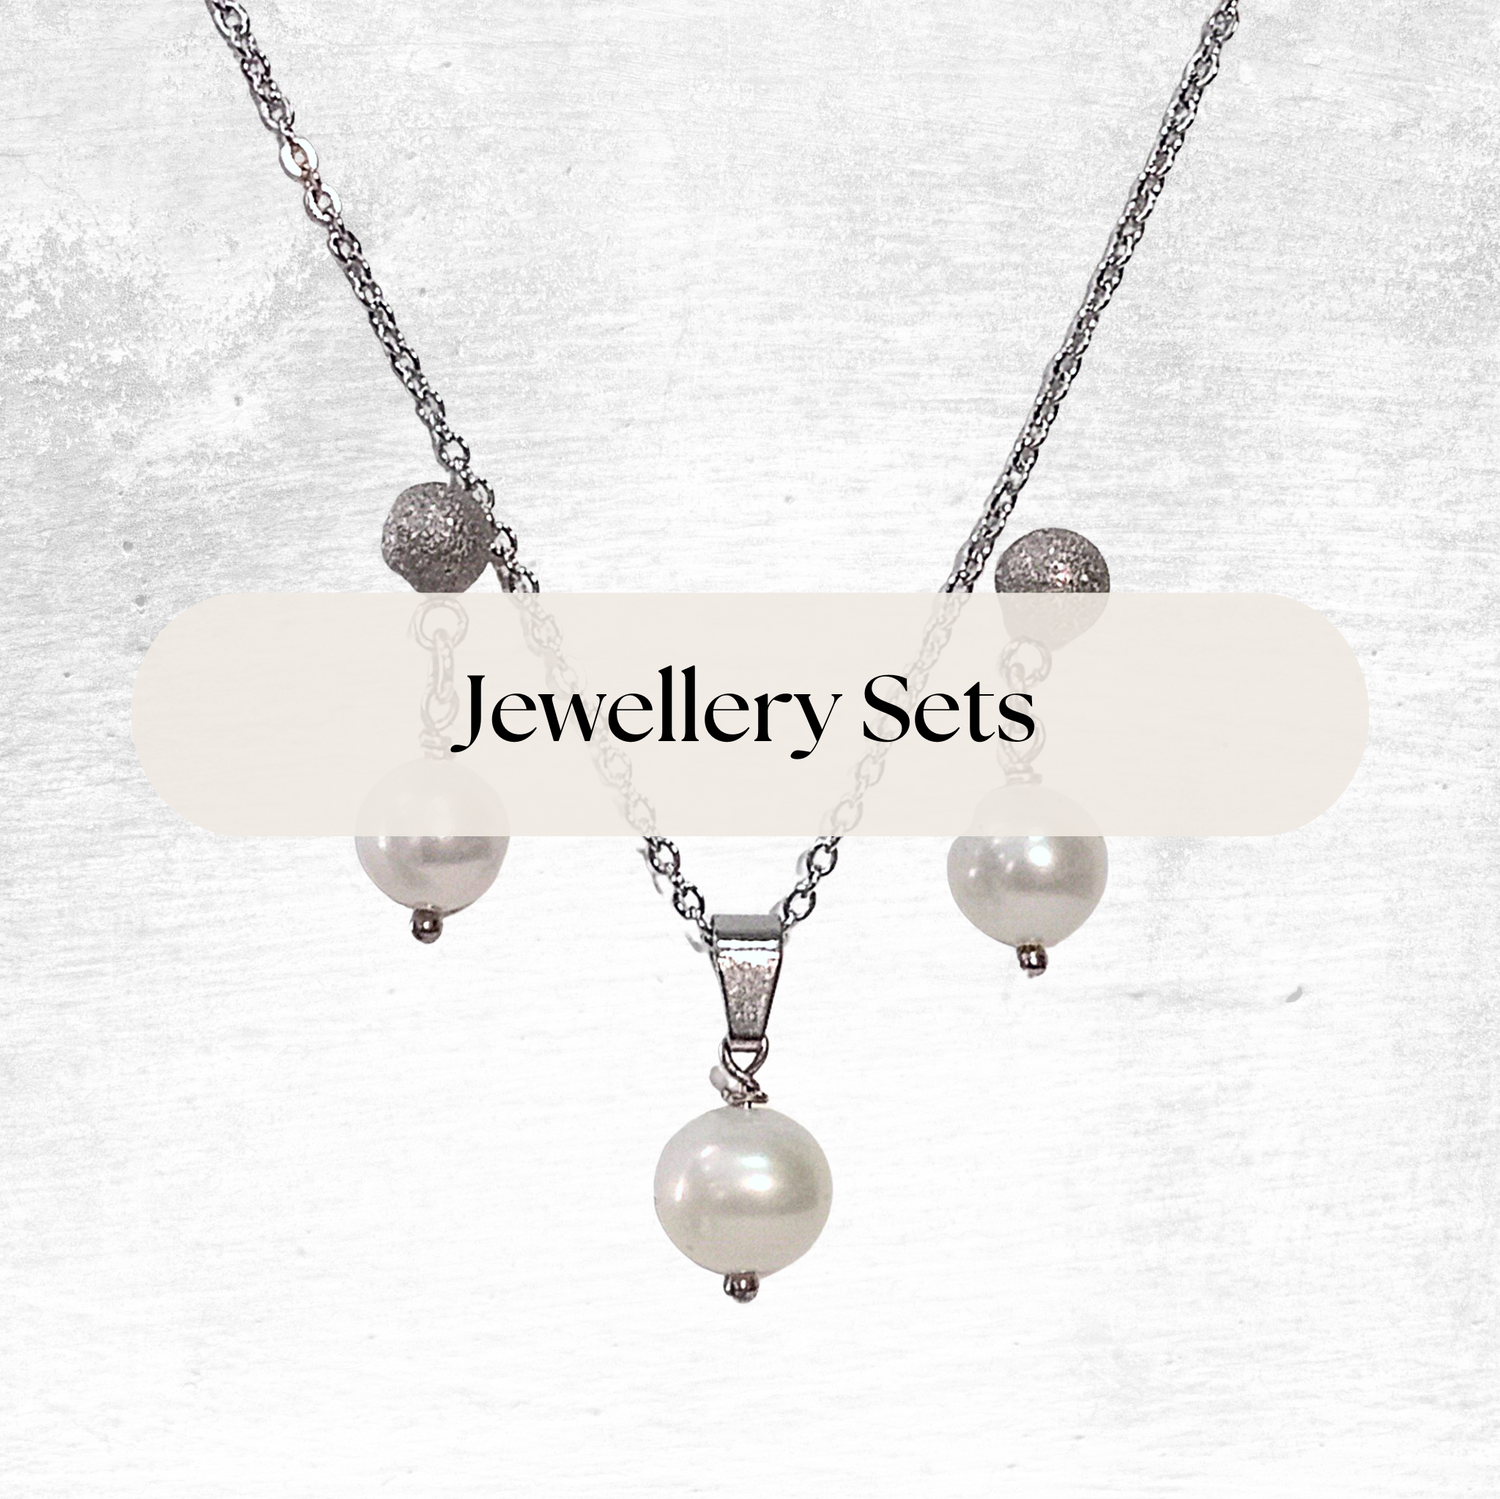 This exquisite White Freshwater Pearls Jewelry Set is a perfect gift for someone special.